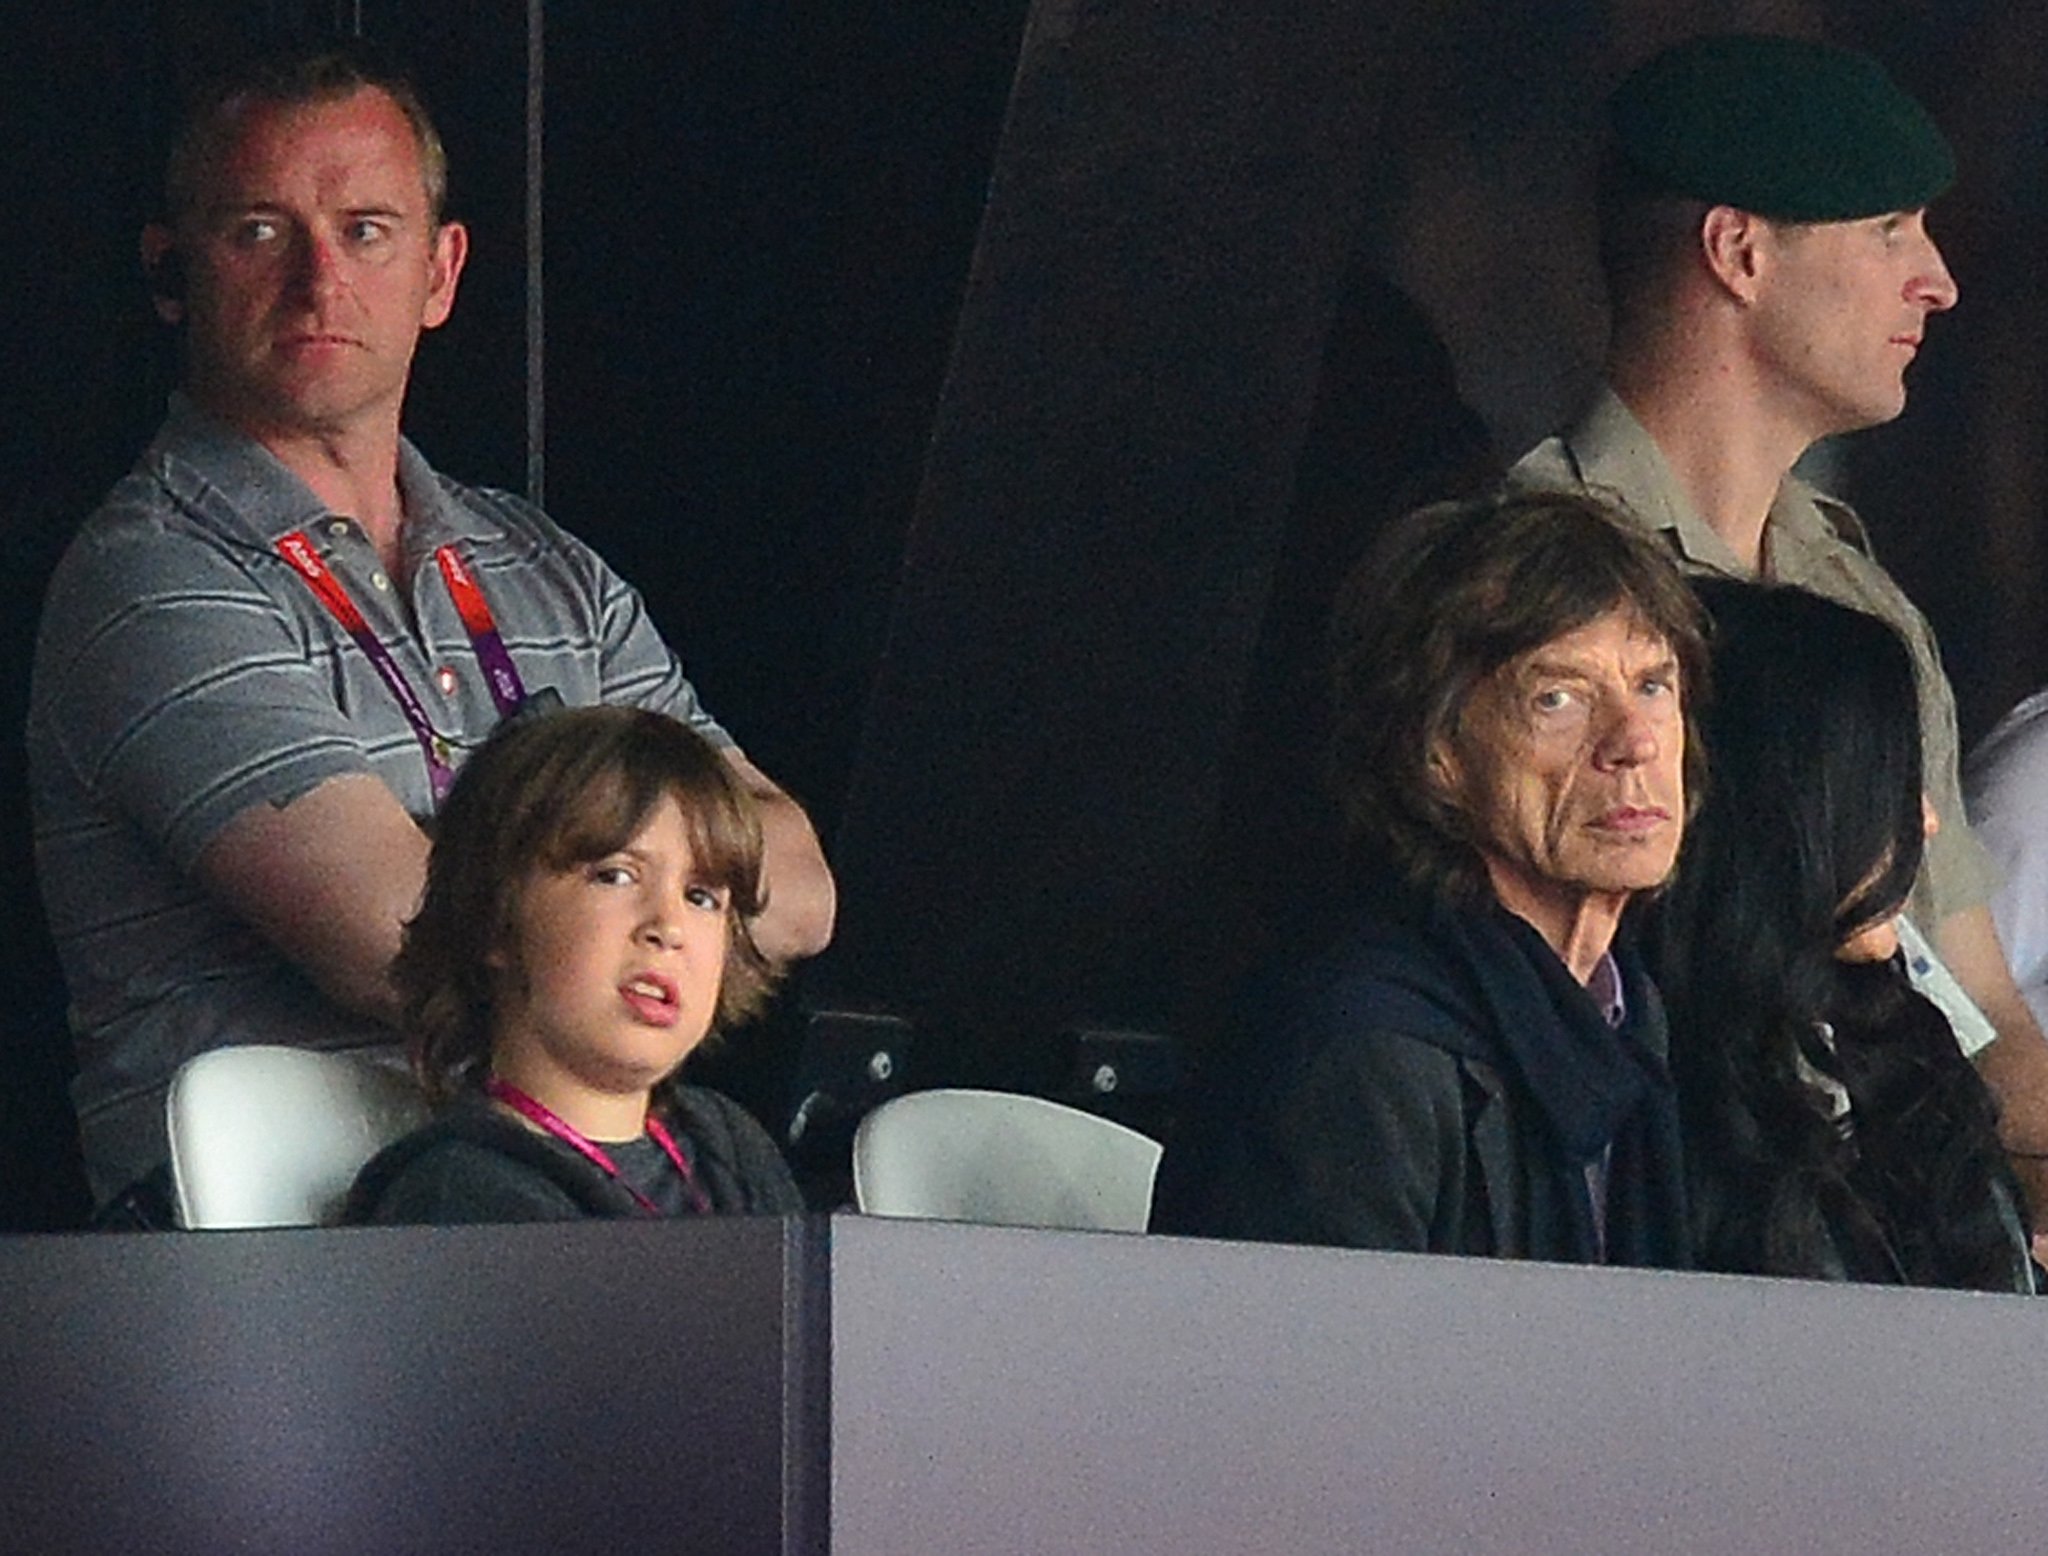 Mick Jagger and his son Lucas Jagger attend the athletics event of the London 2012 Olympic Games on August 6, 2012 in London ┃ Source: Getty Images